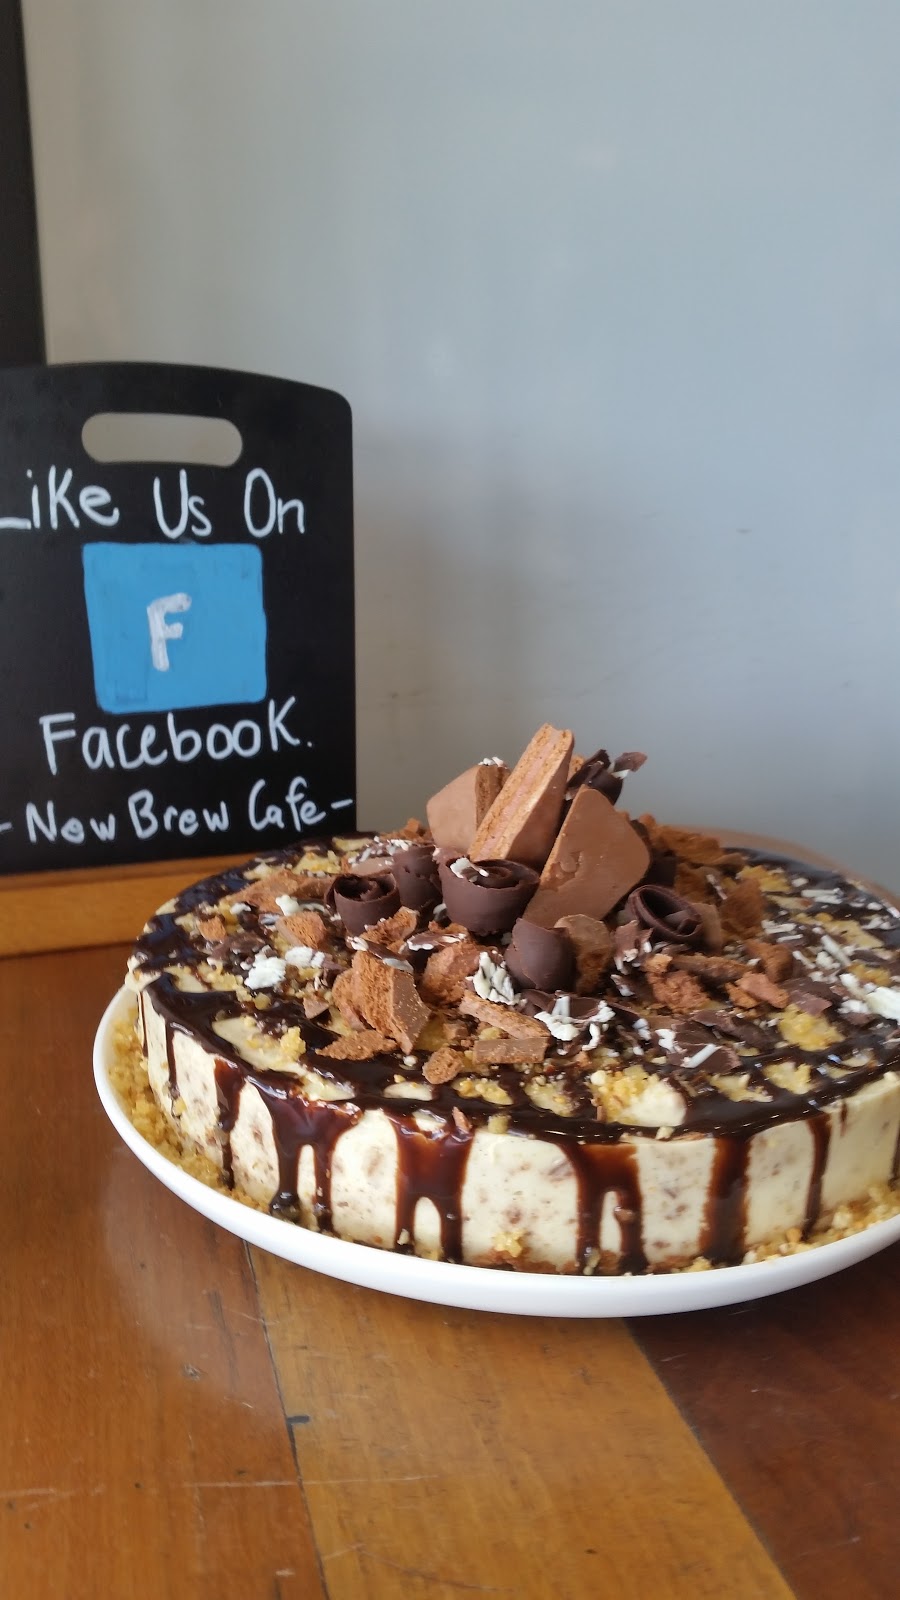 New Brew Cafe | cafe | 102 Taylor St, Toowoomba City QLD 4350, Australia | 0498010814 OR +61 498 010 814